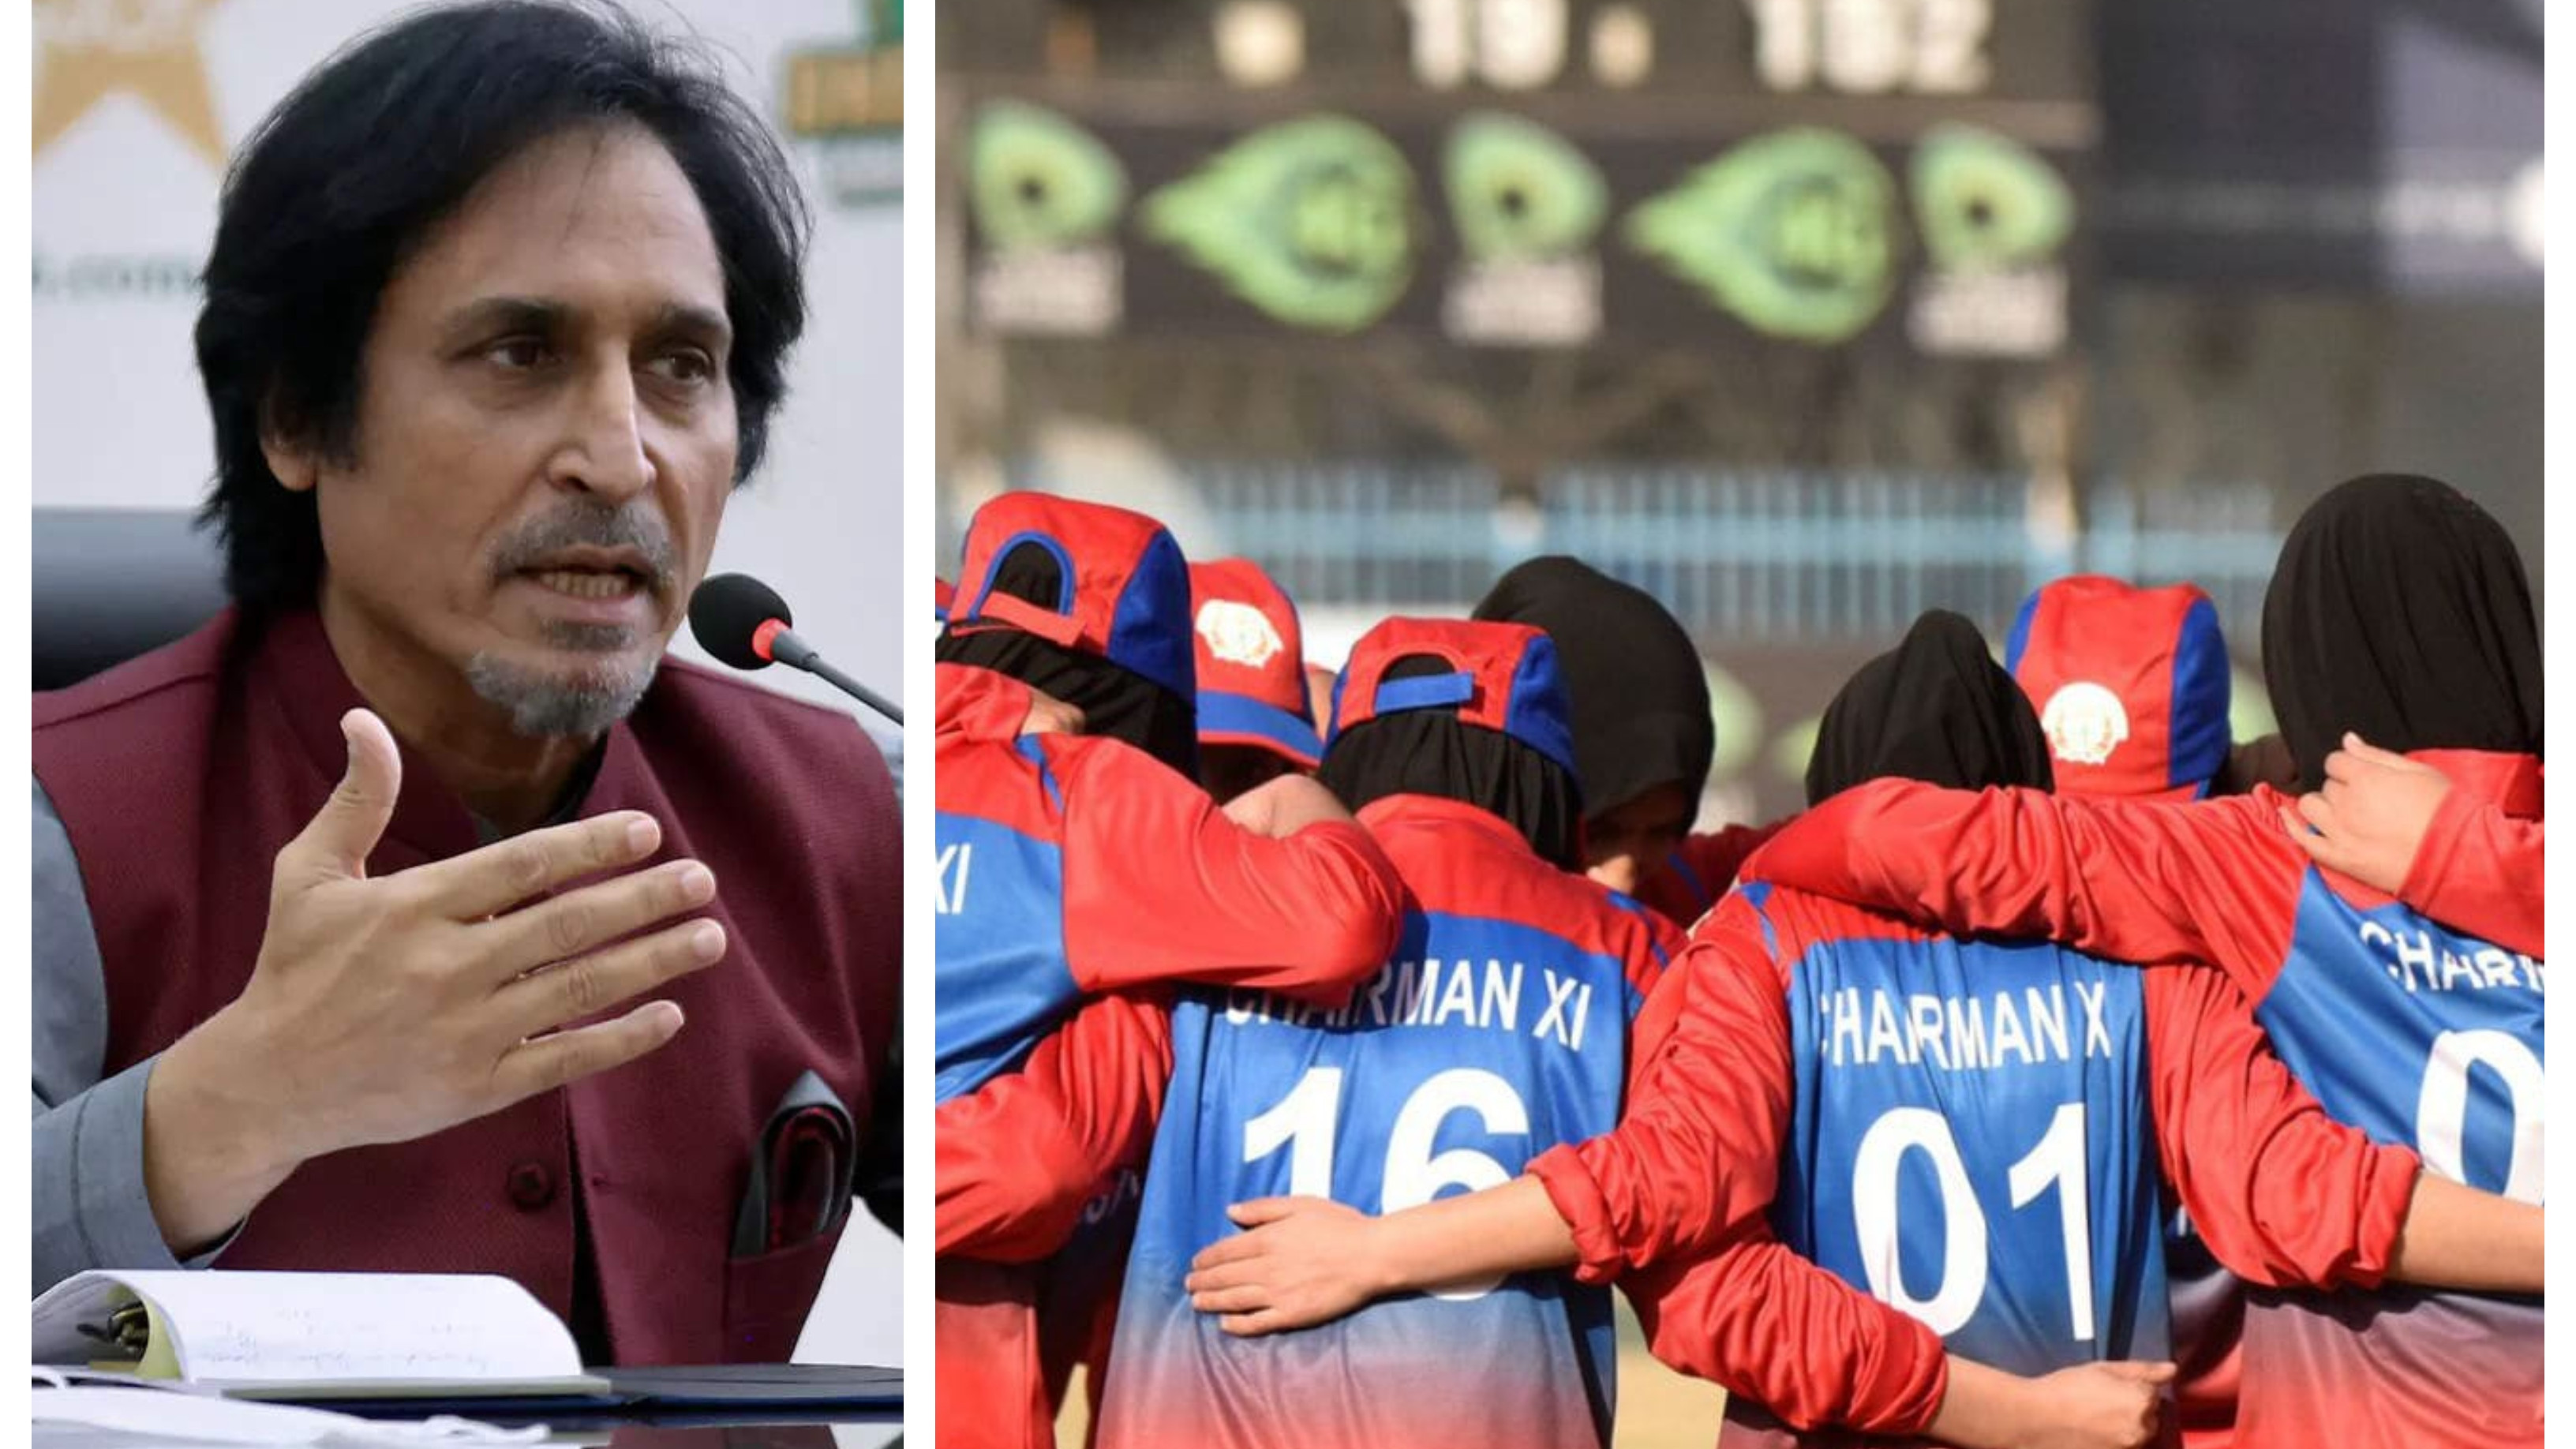 Afghanistan will face pressure from ICC to clarify stance on women’s cricket, says Ramiz Raja